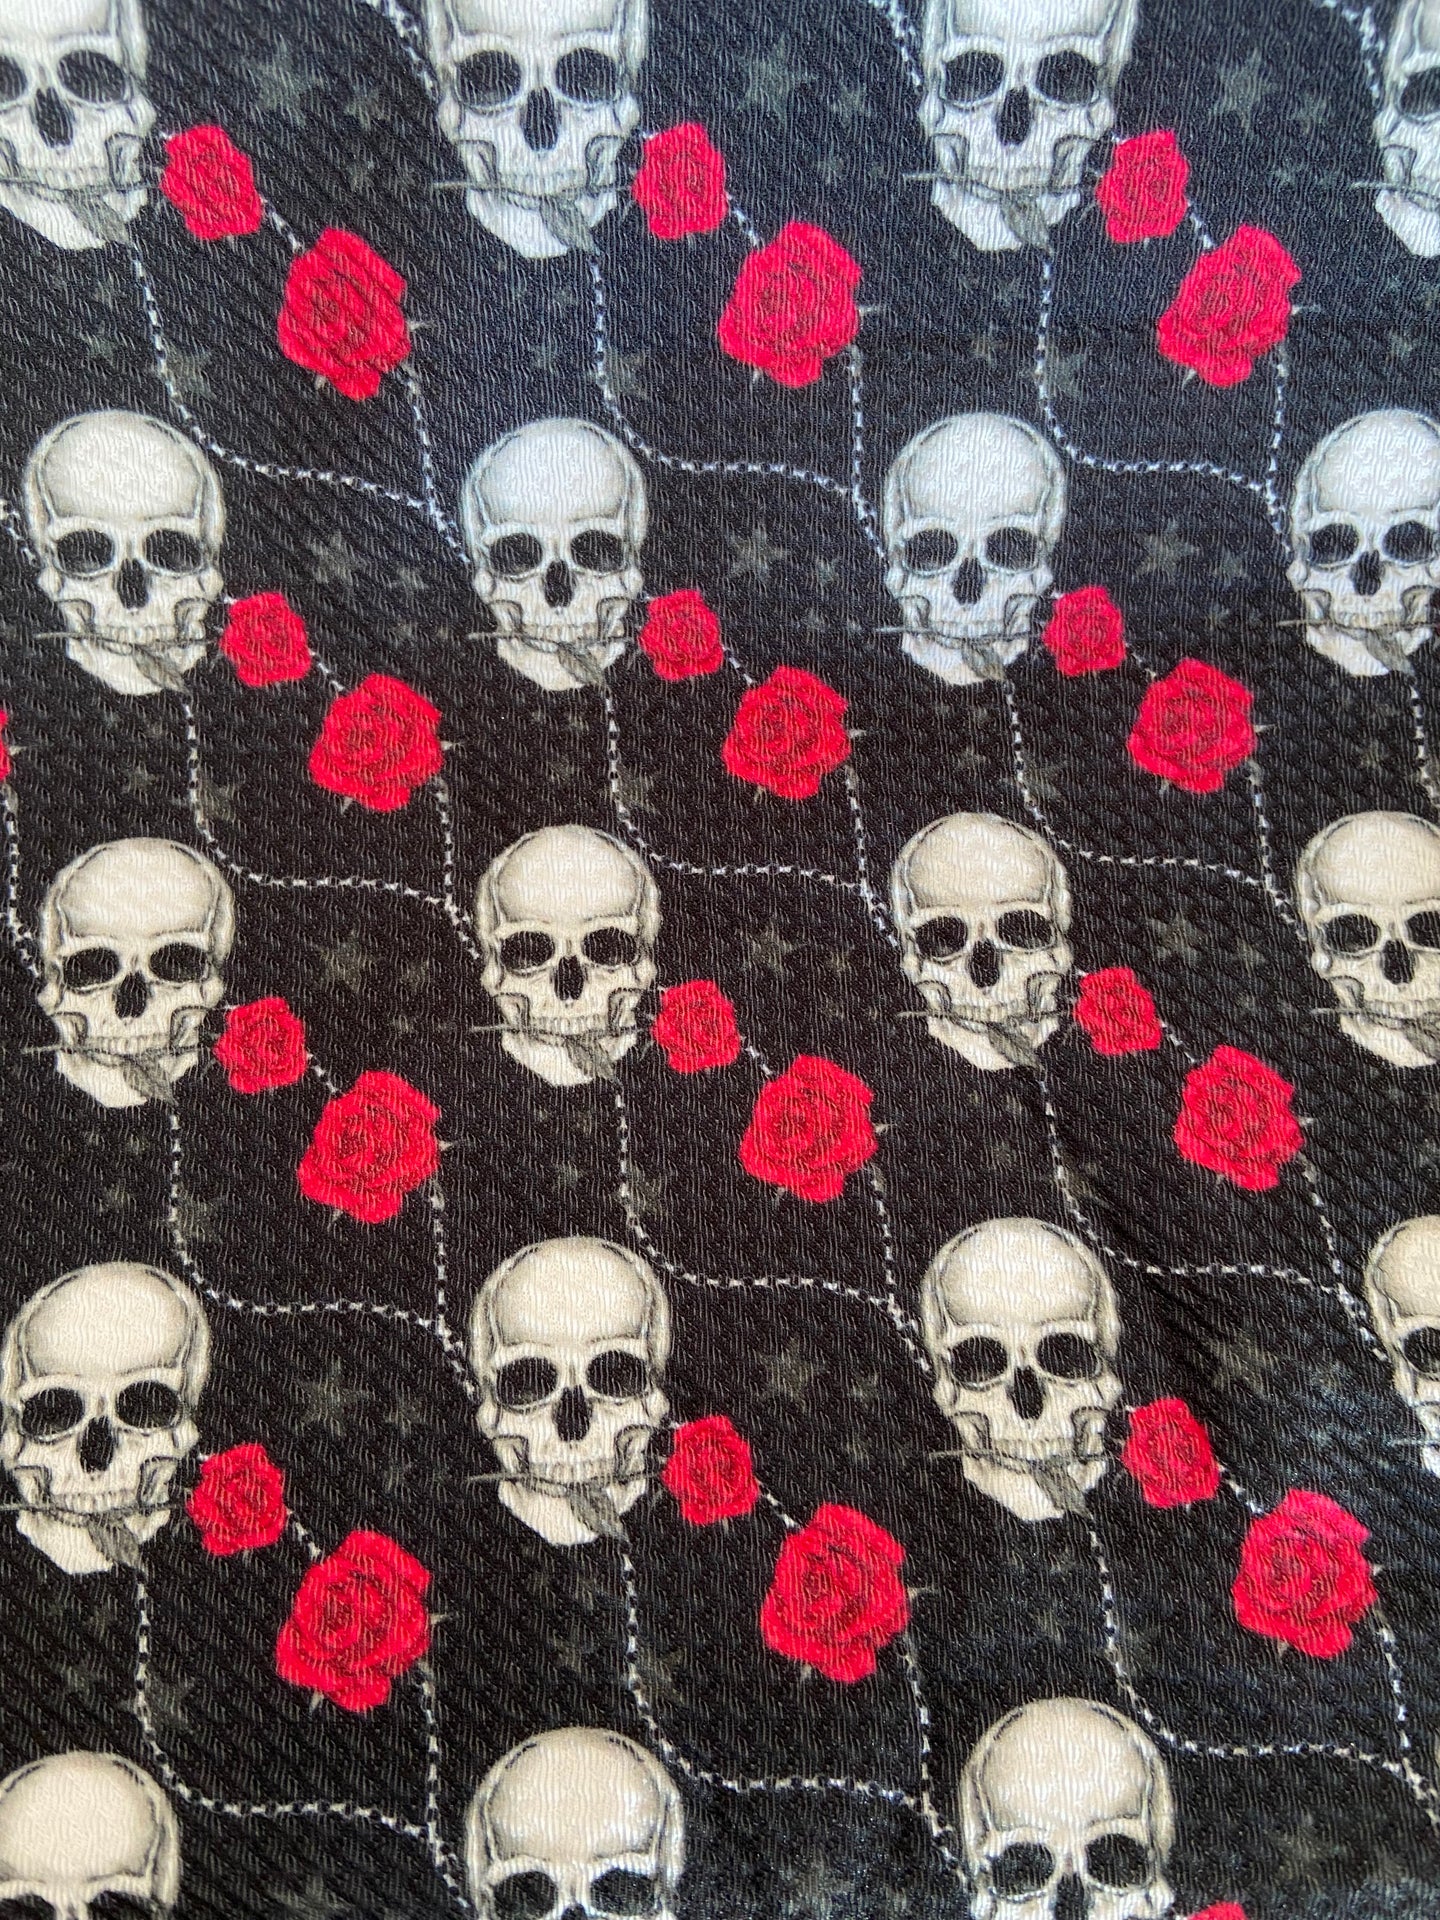 Skulls with Roses